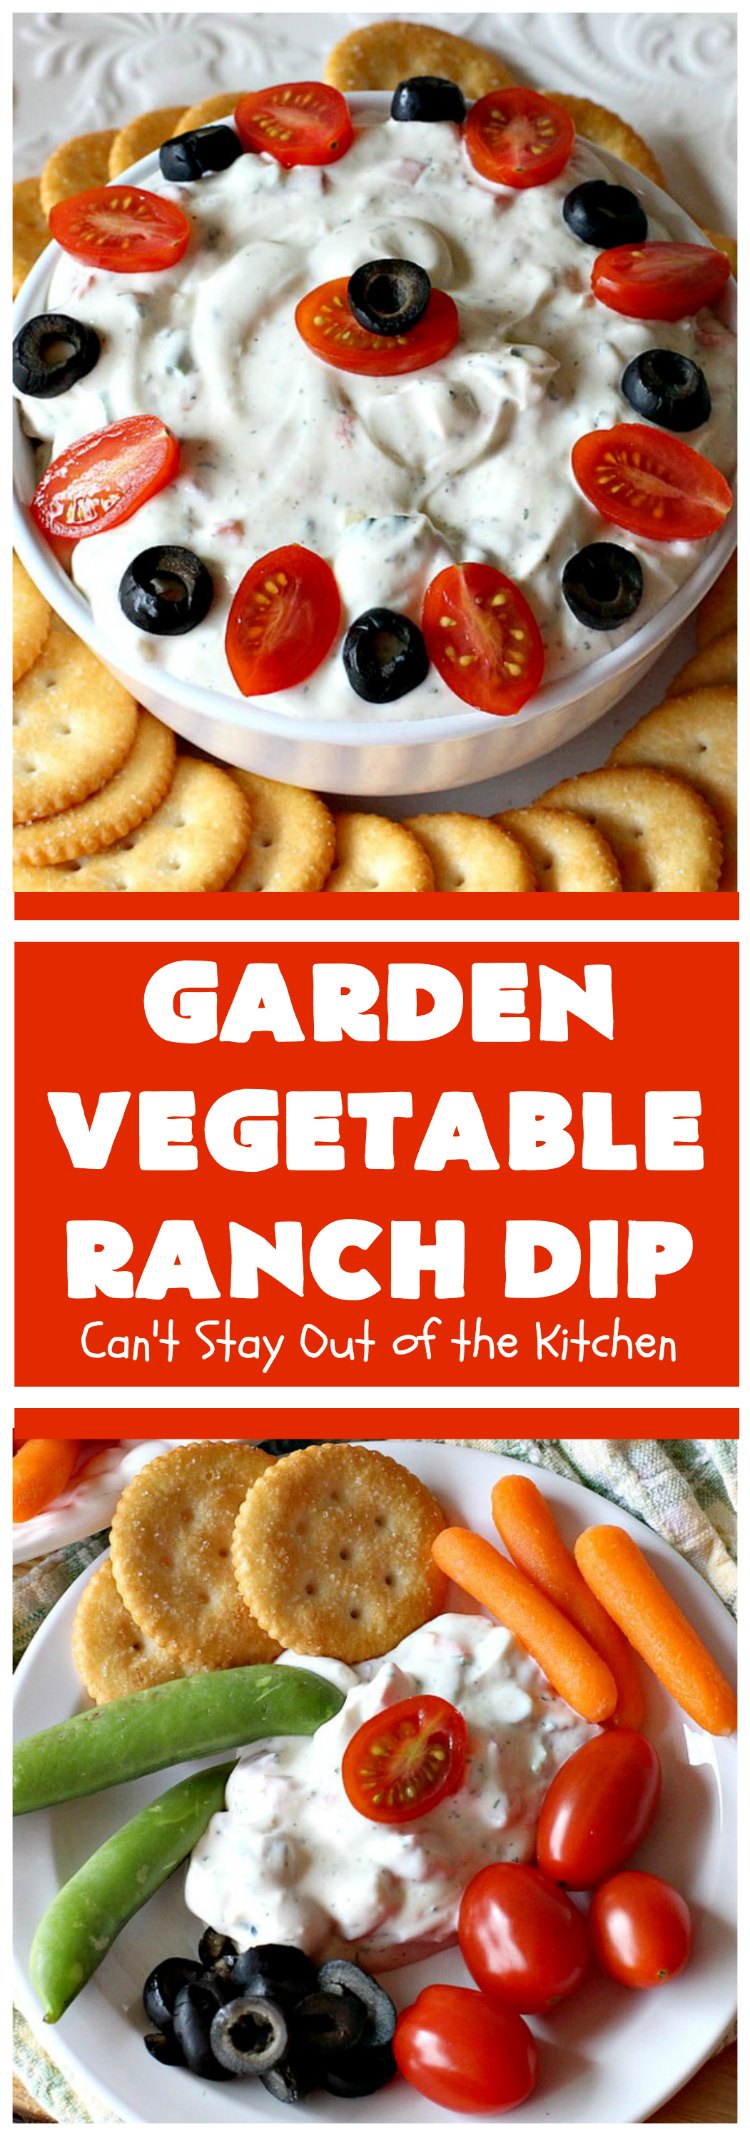 Garden Vegetable Ranch Dip | Can't Stay Out of the Kitchen